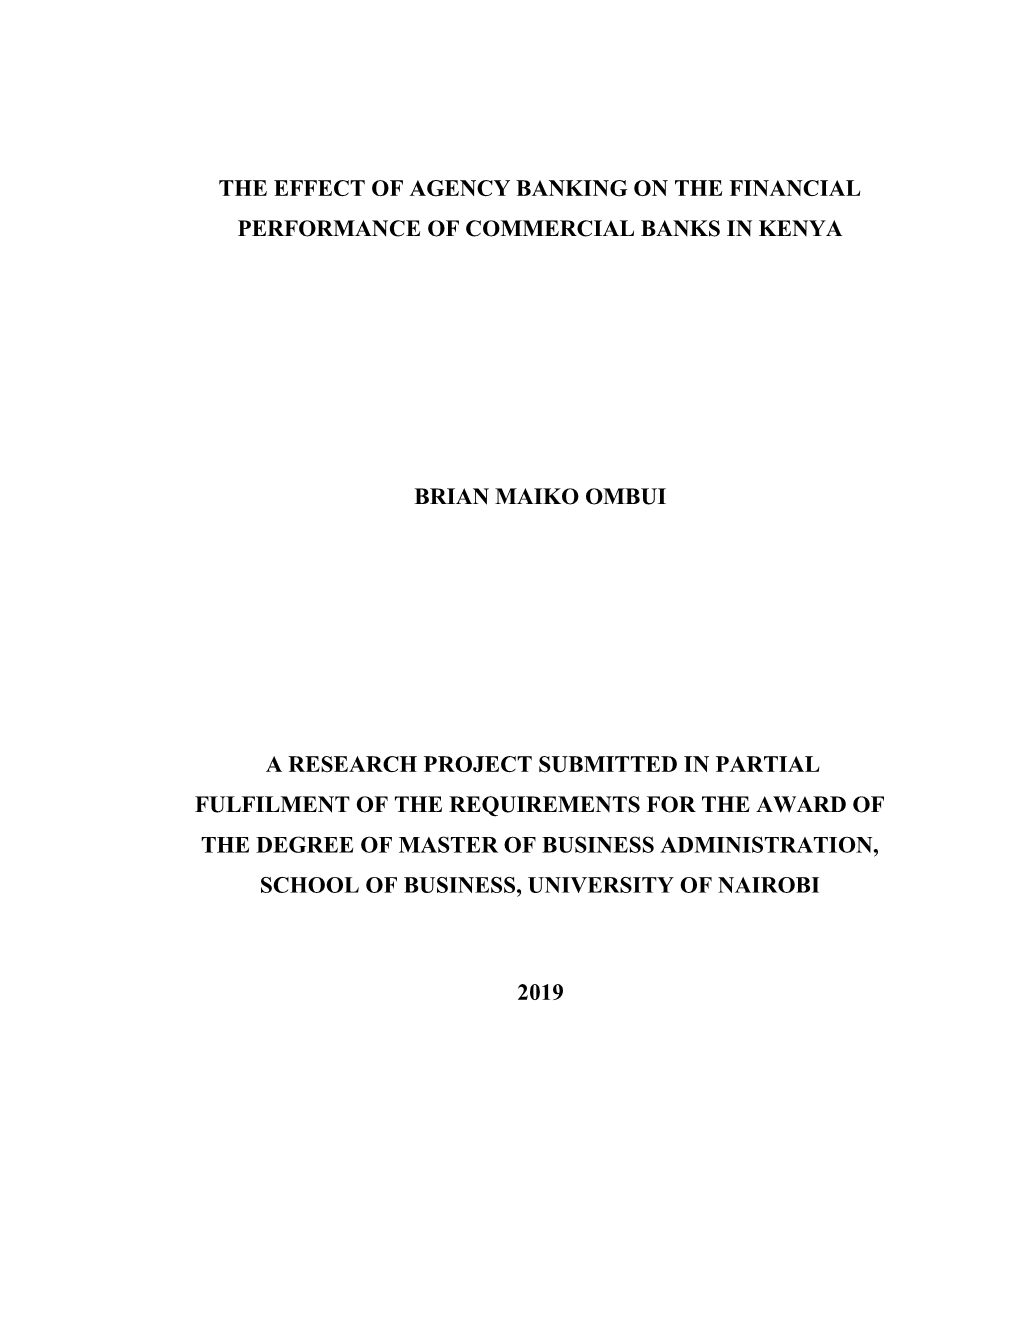 The Effect of Agency Banking on the Financial Performance of Commercial Banks in Kenya